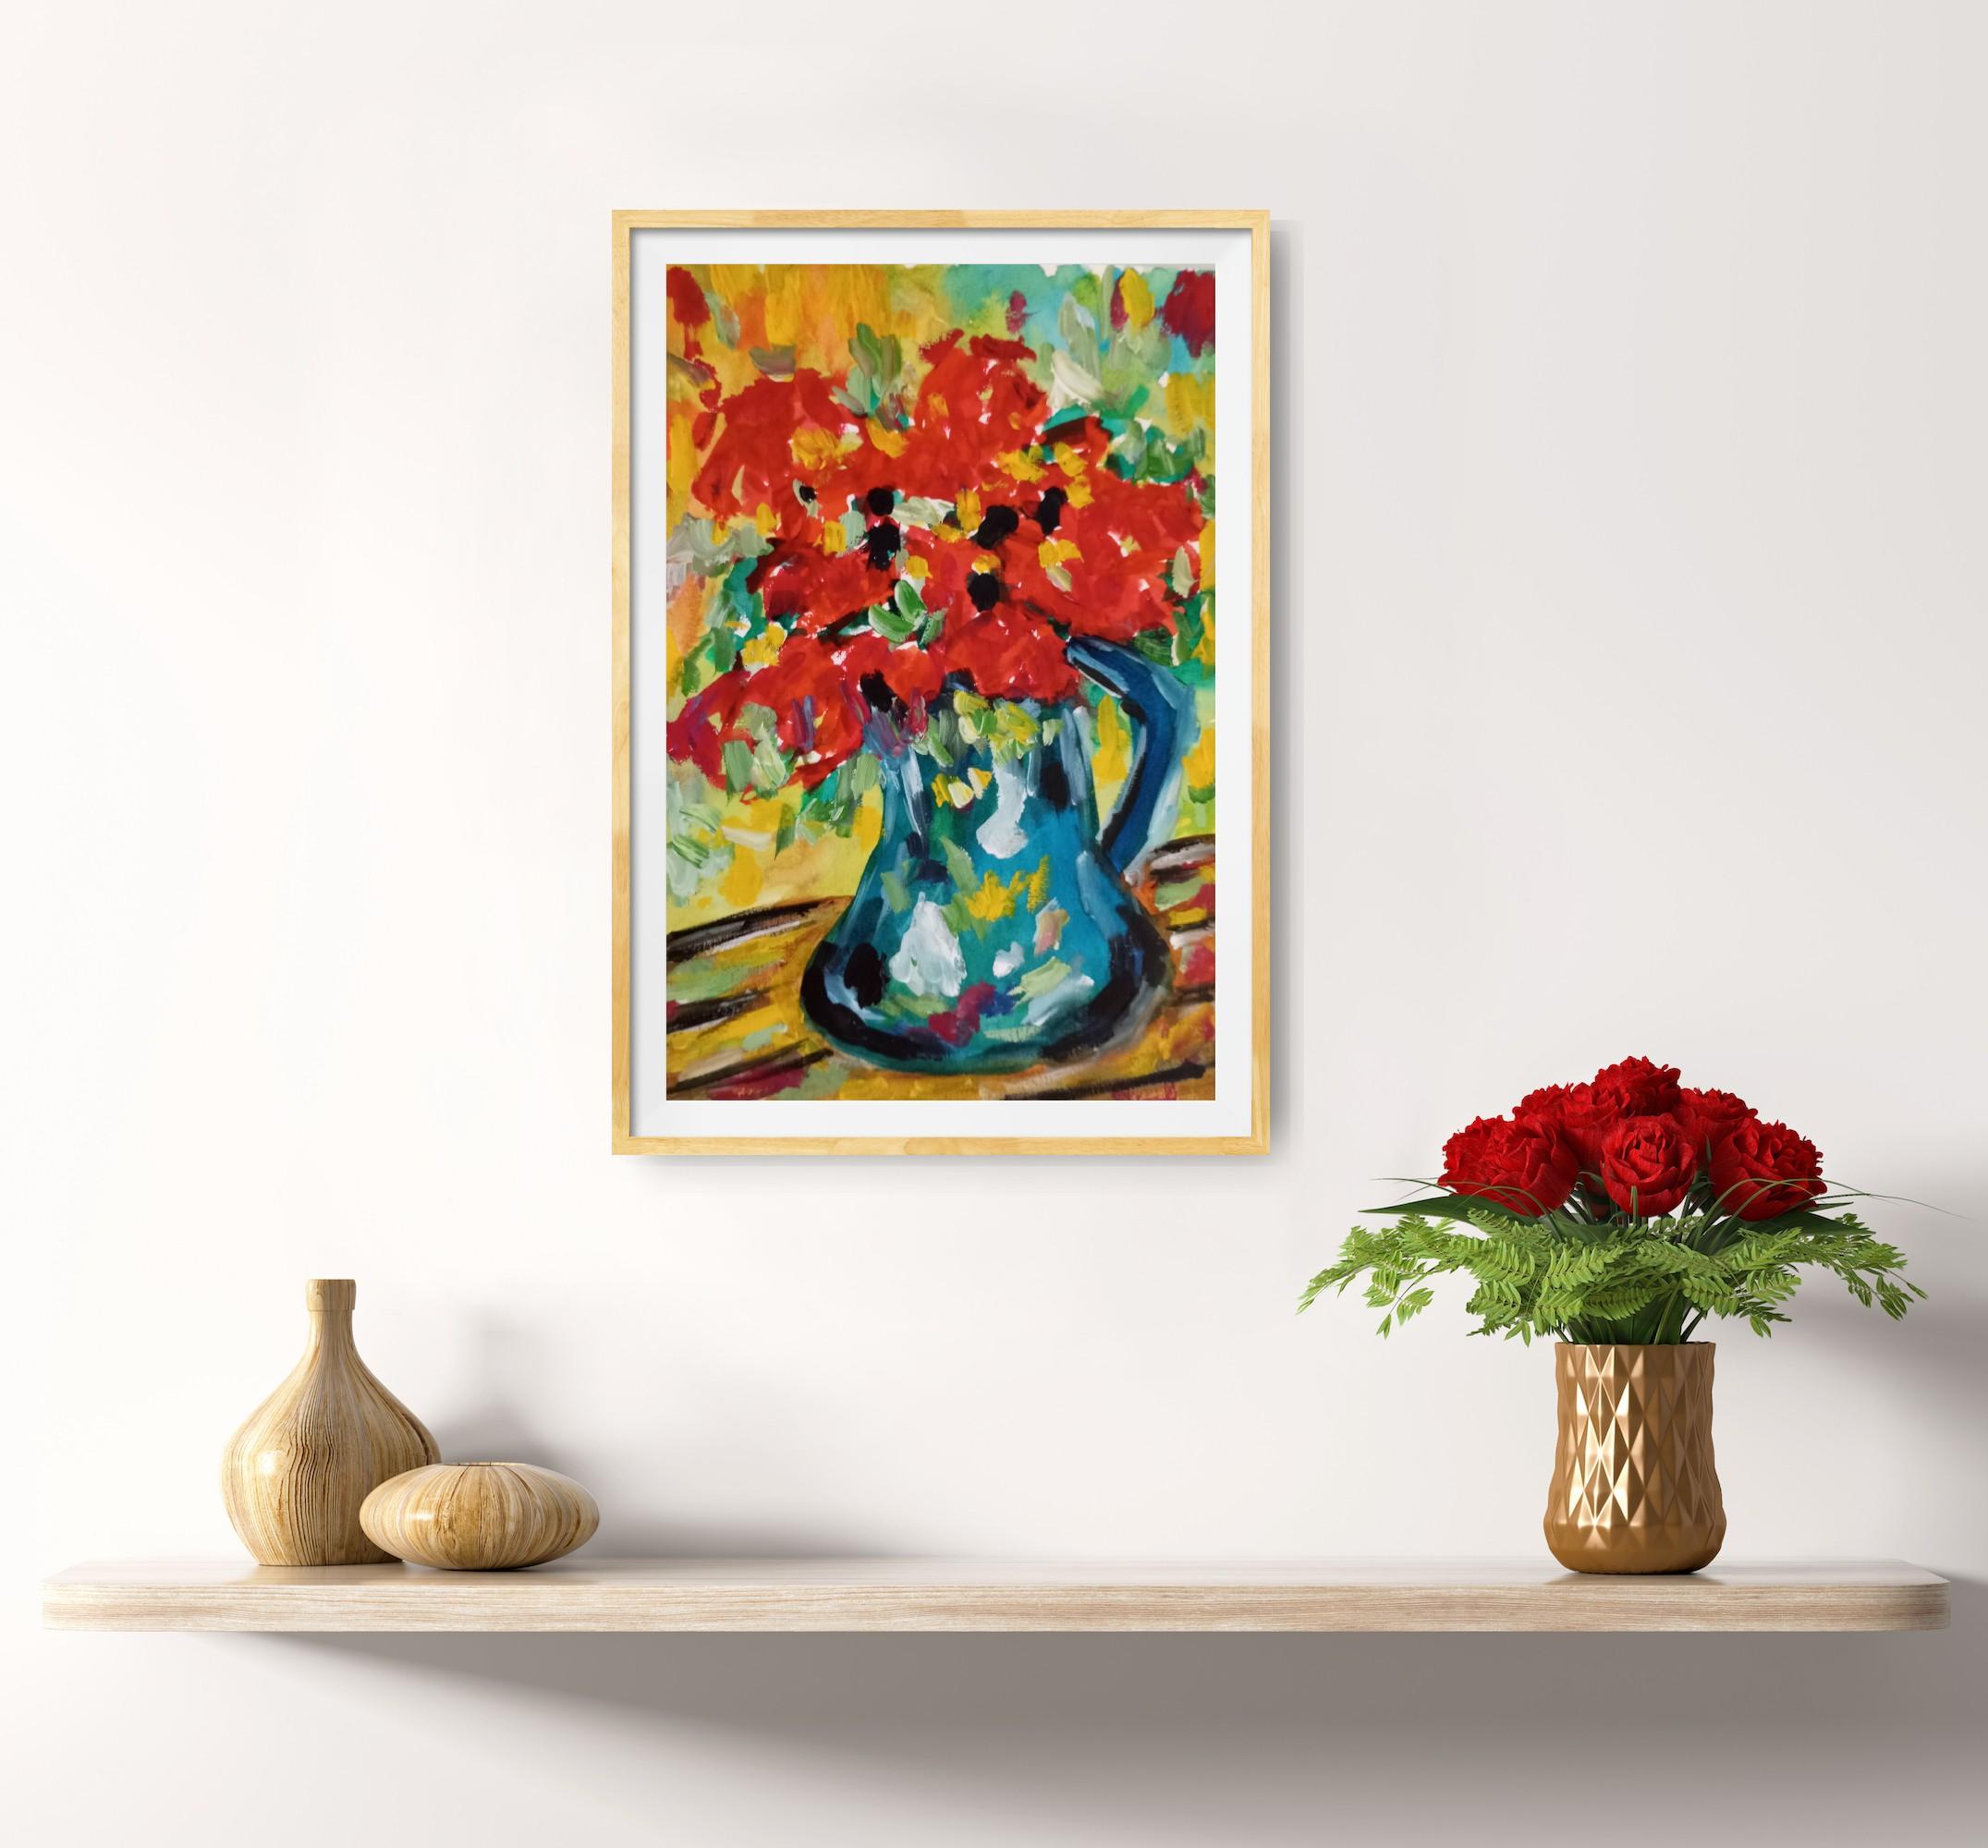 
In this abstract floral artwork I experience the world of nature through the bright colors of a summer period.

While painting, I sought to capture the beauty of summer flowers which are full of different colors.

In my art practice I love to use